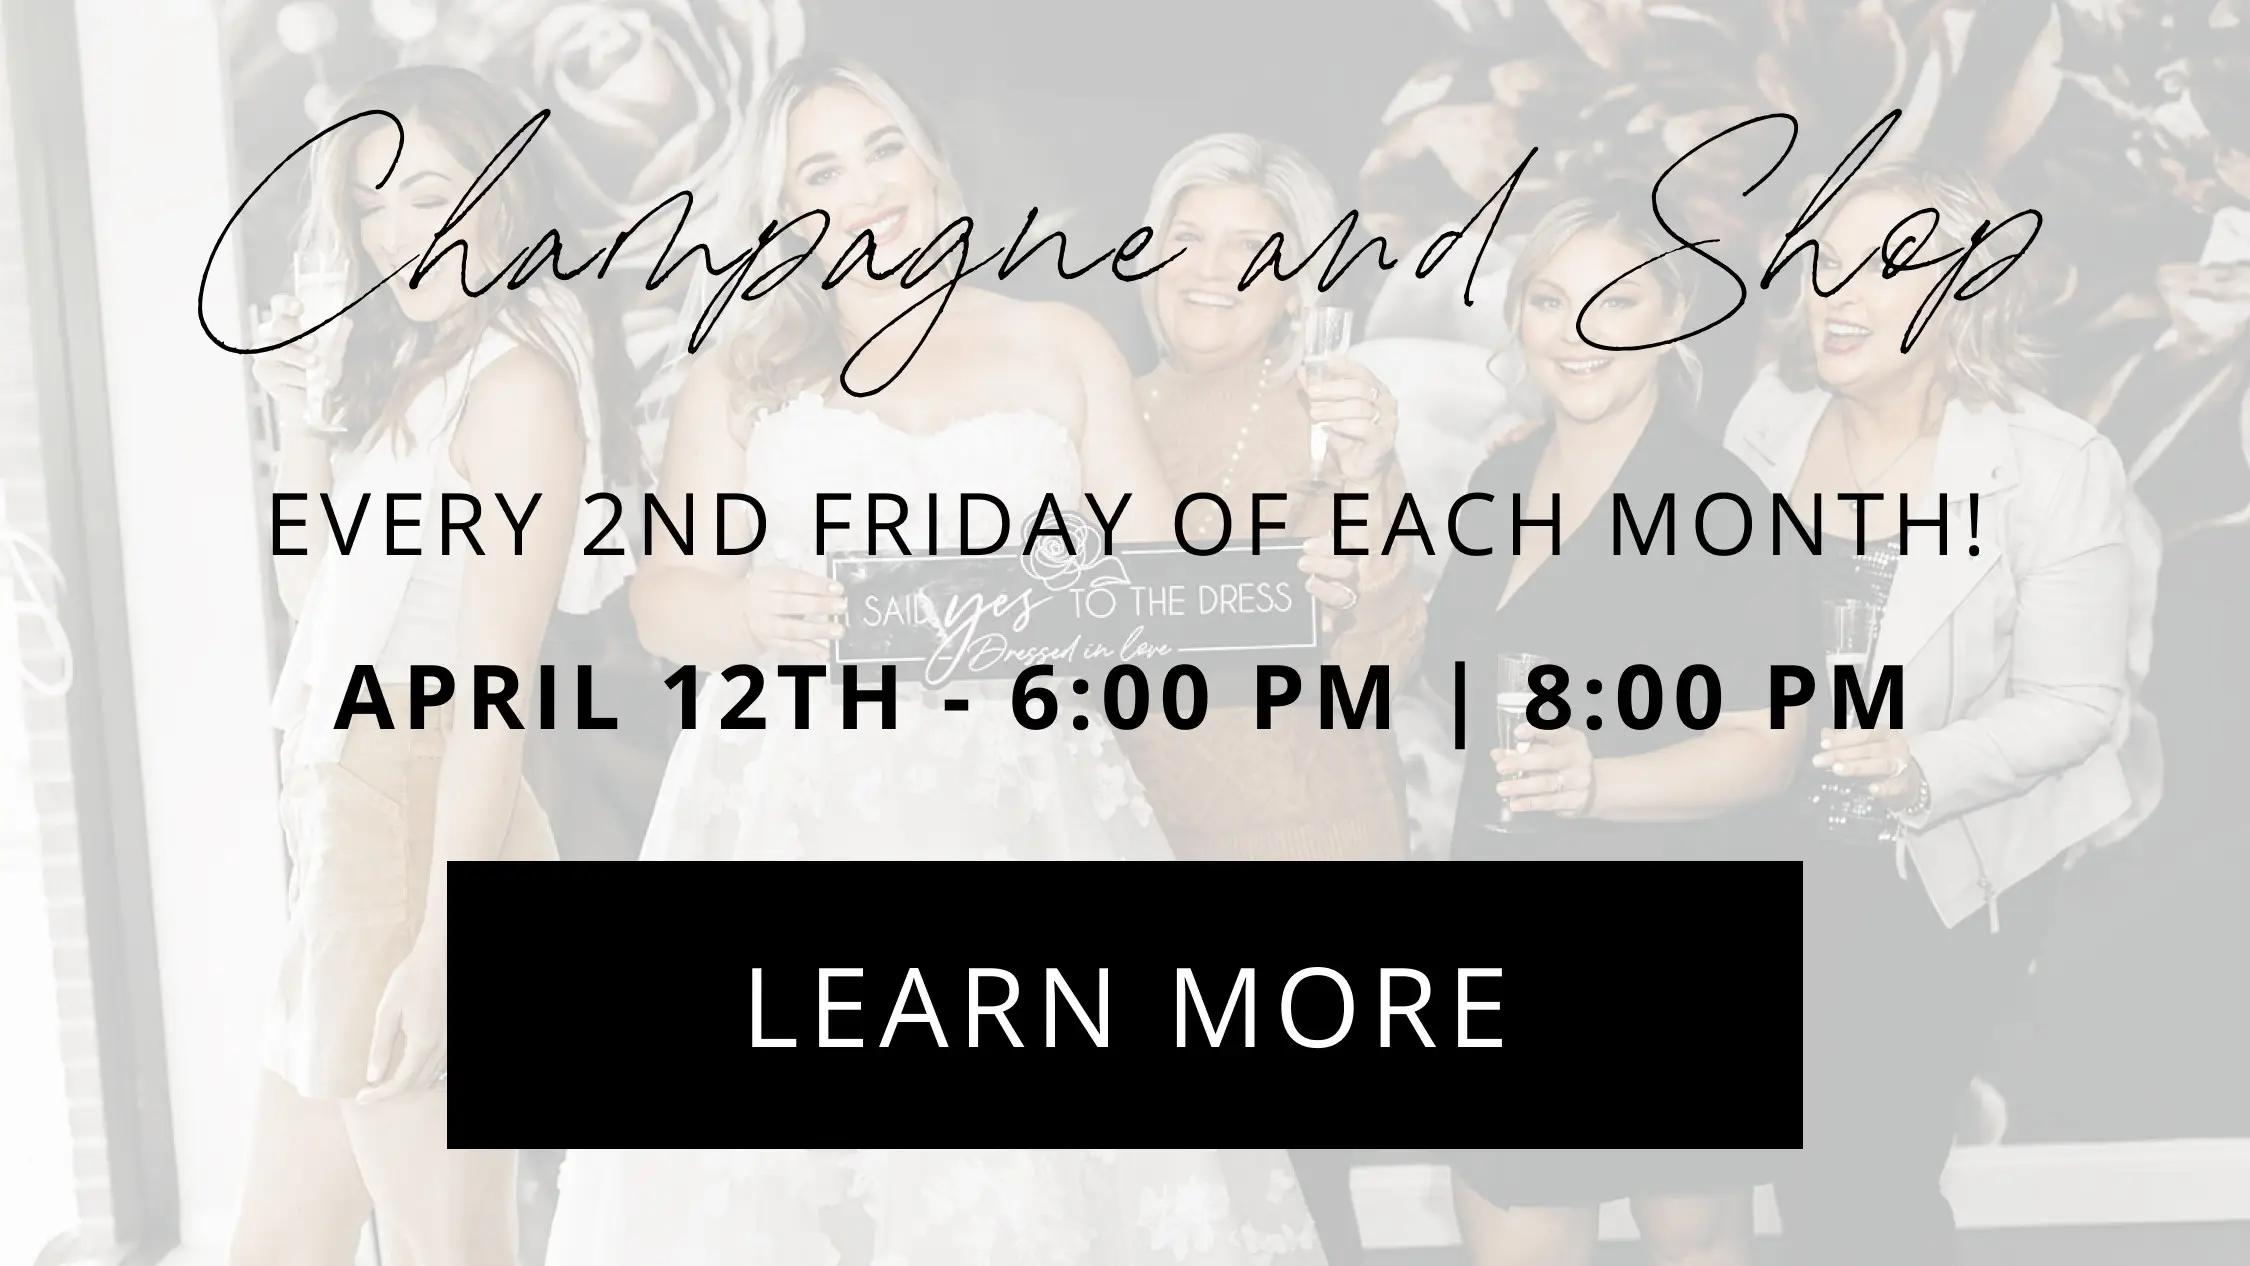 Mobile Champagne & Shop Event Banner